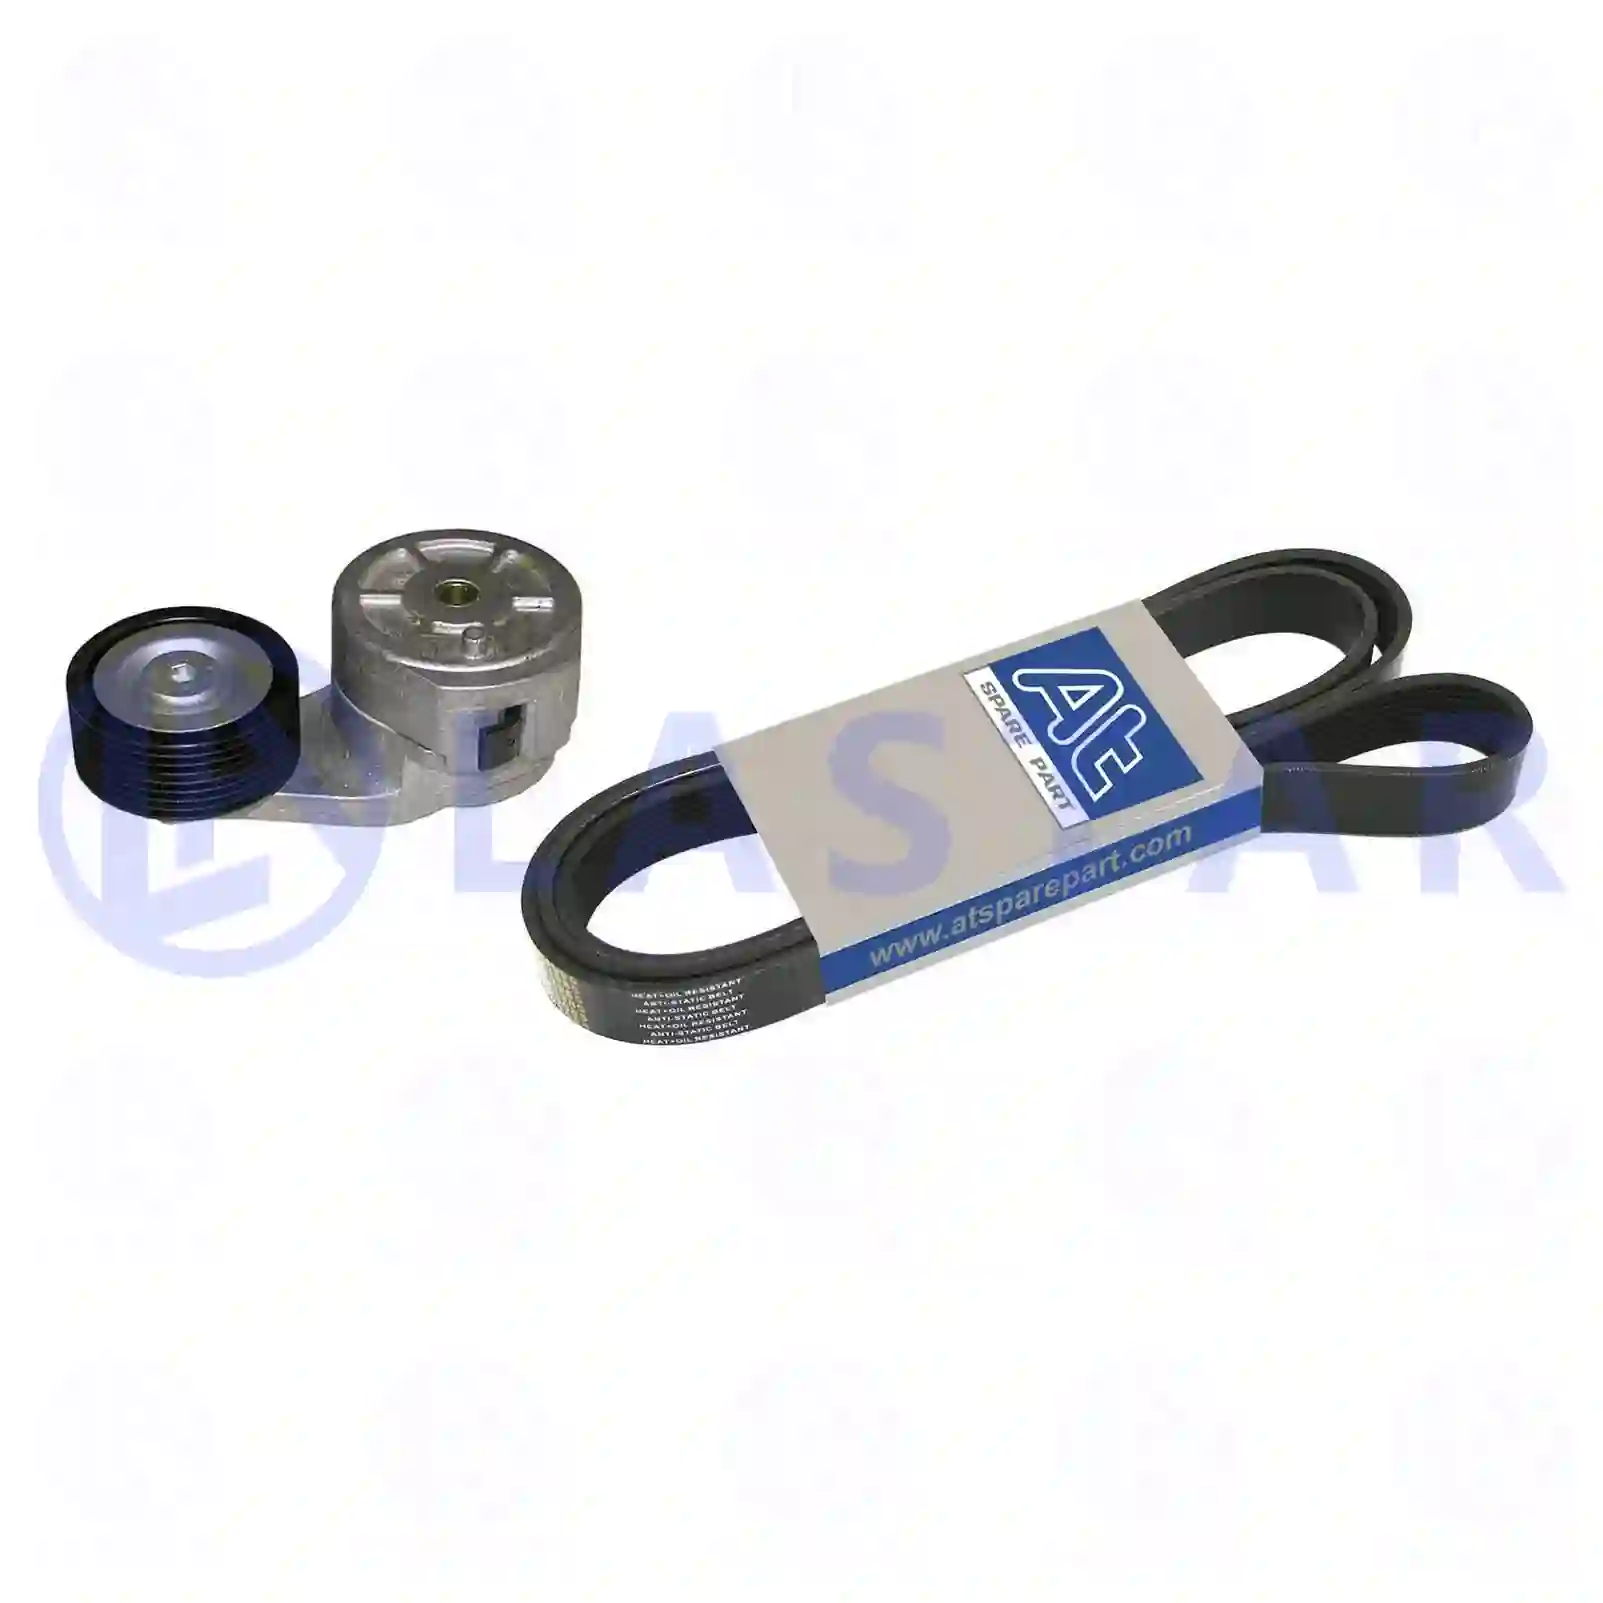 Belt tensioner, complete, with multiribbed belt, 77709957, 1438743S, 1503115S, 1545984S, 1774653S, 1859656S, 2197004S ||  77709957 Lastar Spare Part | Truck Spare Parts, Auotomotive Spare Parts Belt tensioner, complete, with multiribbed belt, 77709957, 1438743S, 1503115S, 1545984S, 1774653S, 1859656S, 2197004S ||  77709957 Lastar Spare Part | Truck Spare Parts, Auotomotive Spare Parts